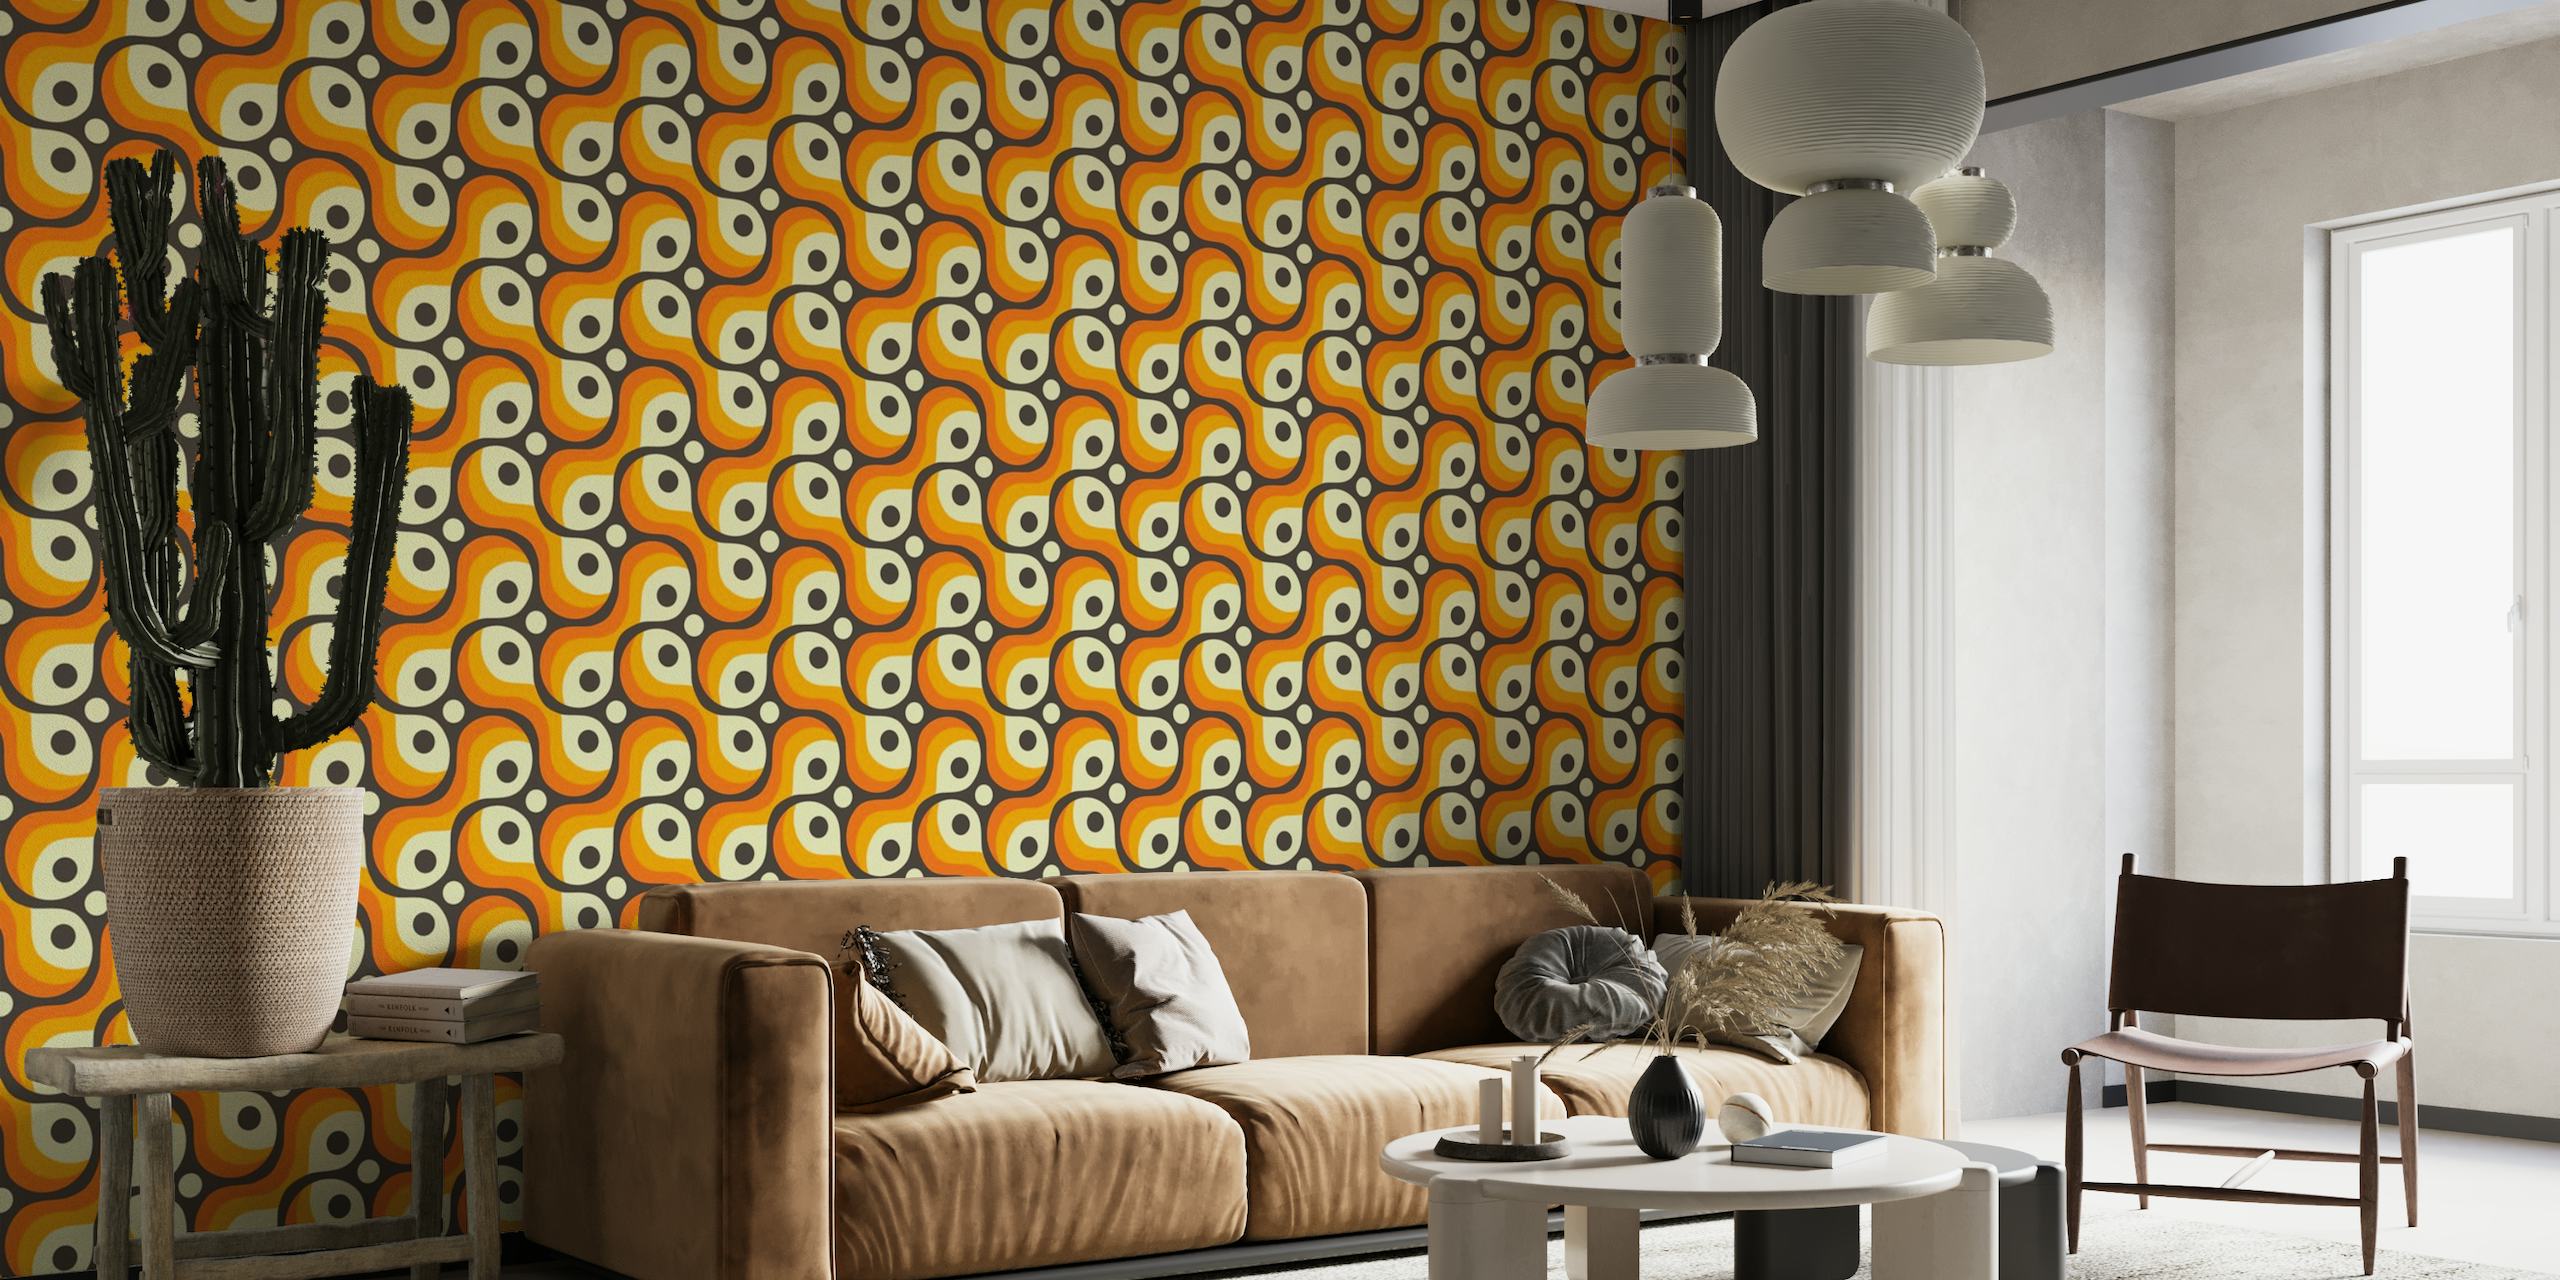 Vintage-inspired abstract retro shapes wall mural in orange, cream, and black